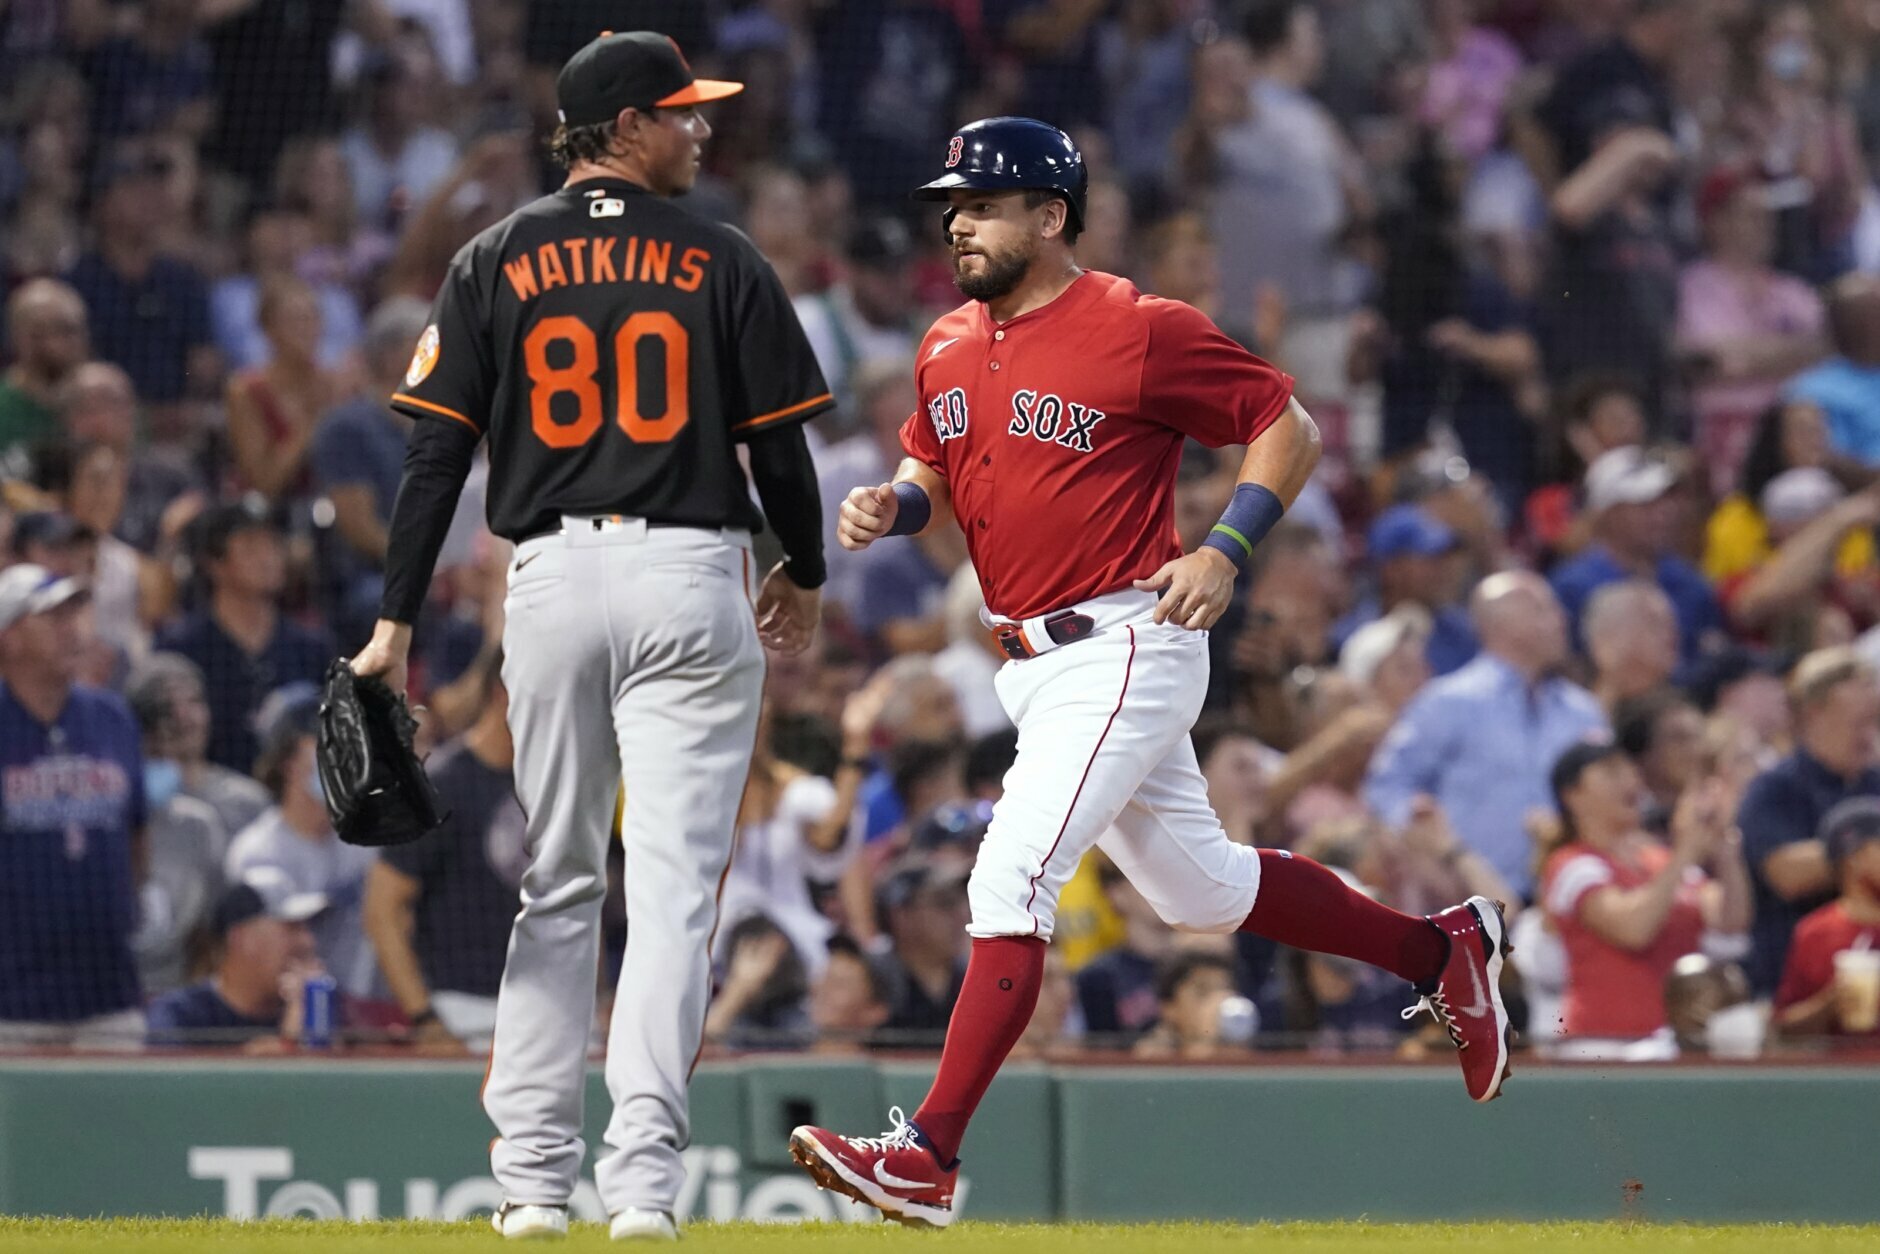 Boston Red Sox lineup: Bobby Dalbec sits, Kyle Schwarber starts at